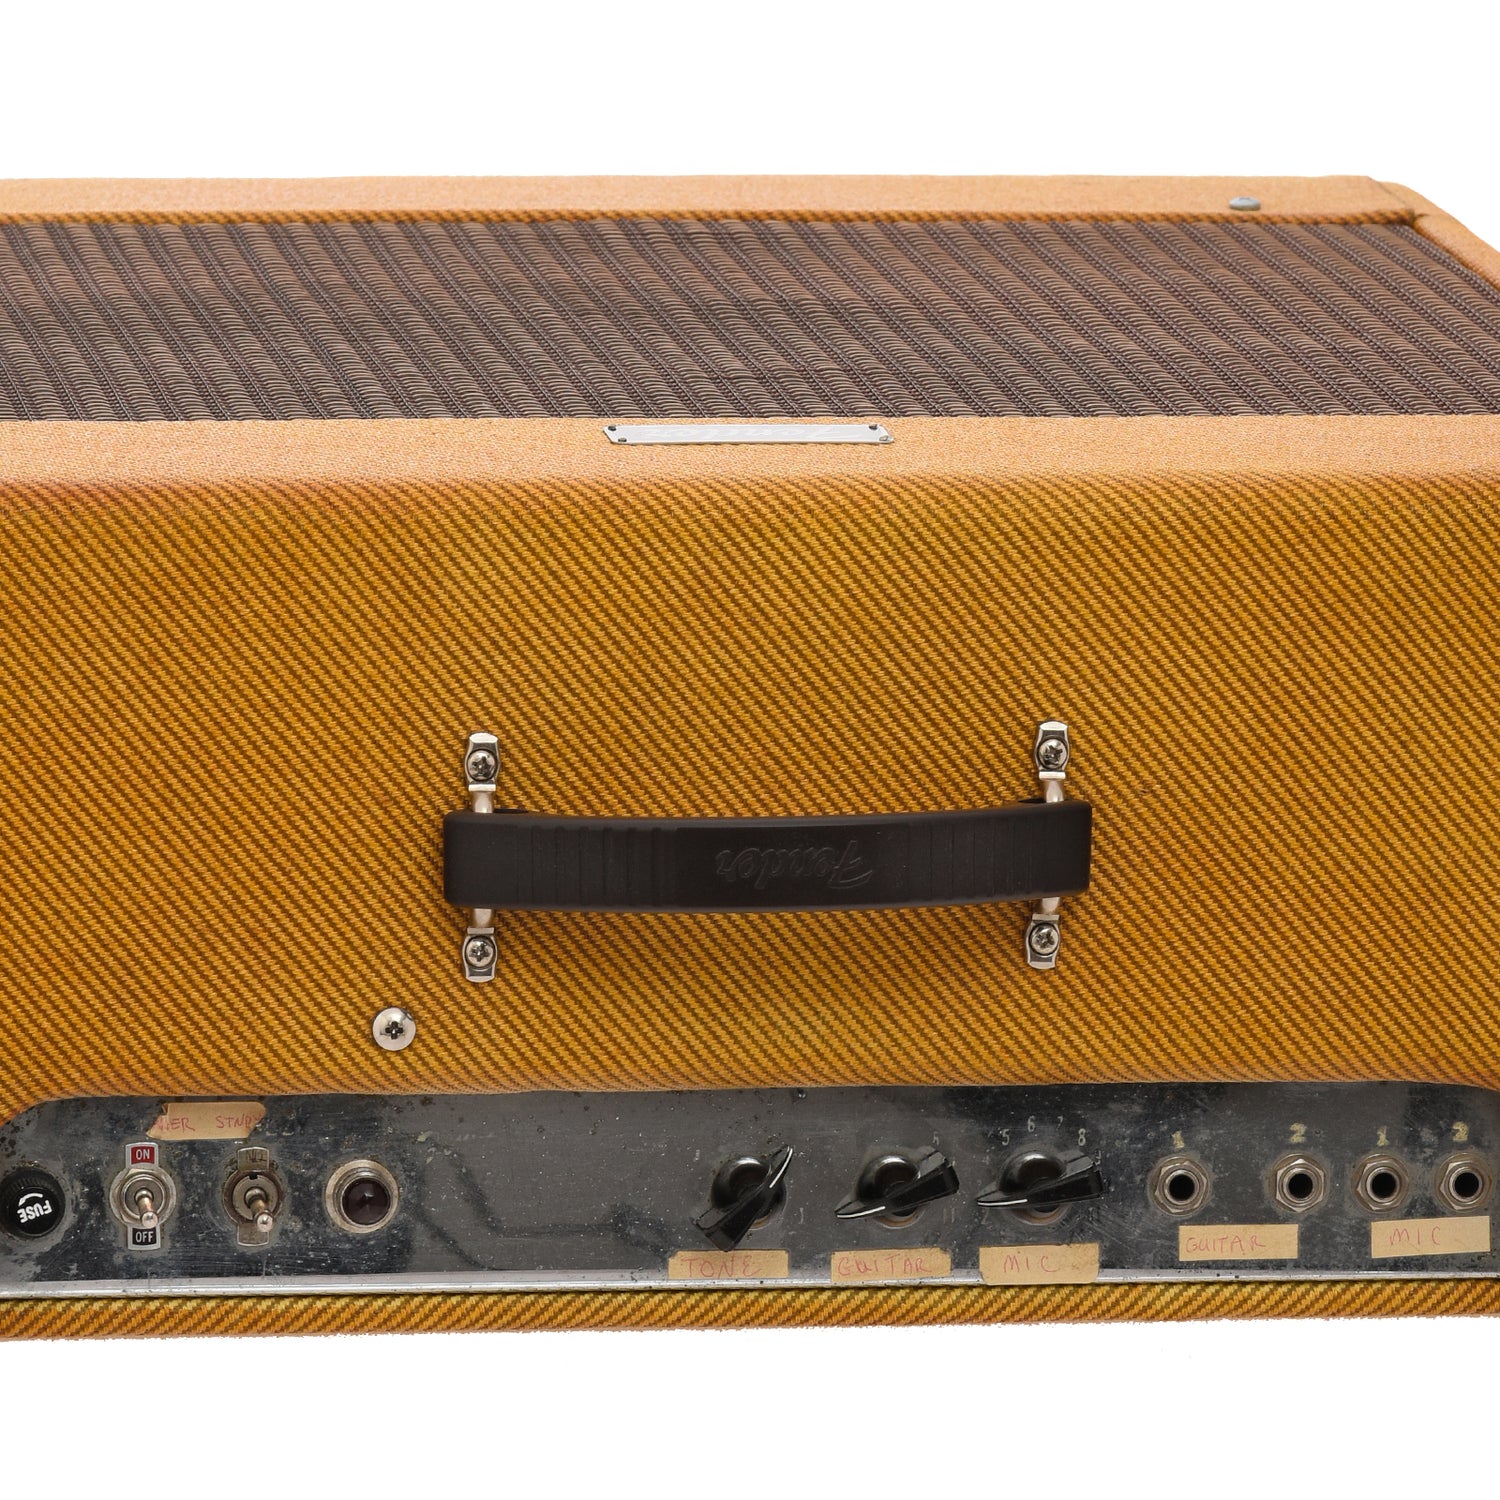 Top Control panel of 1955 Fender Pro Combo Amp